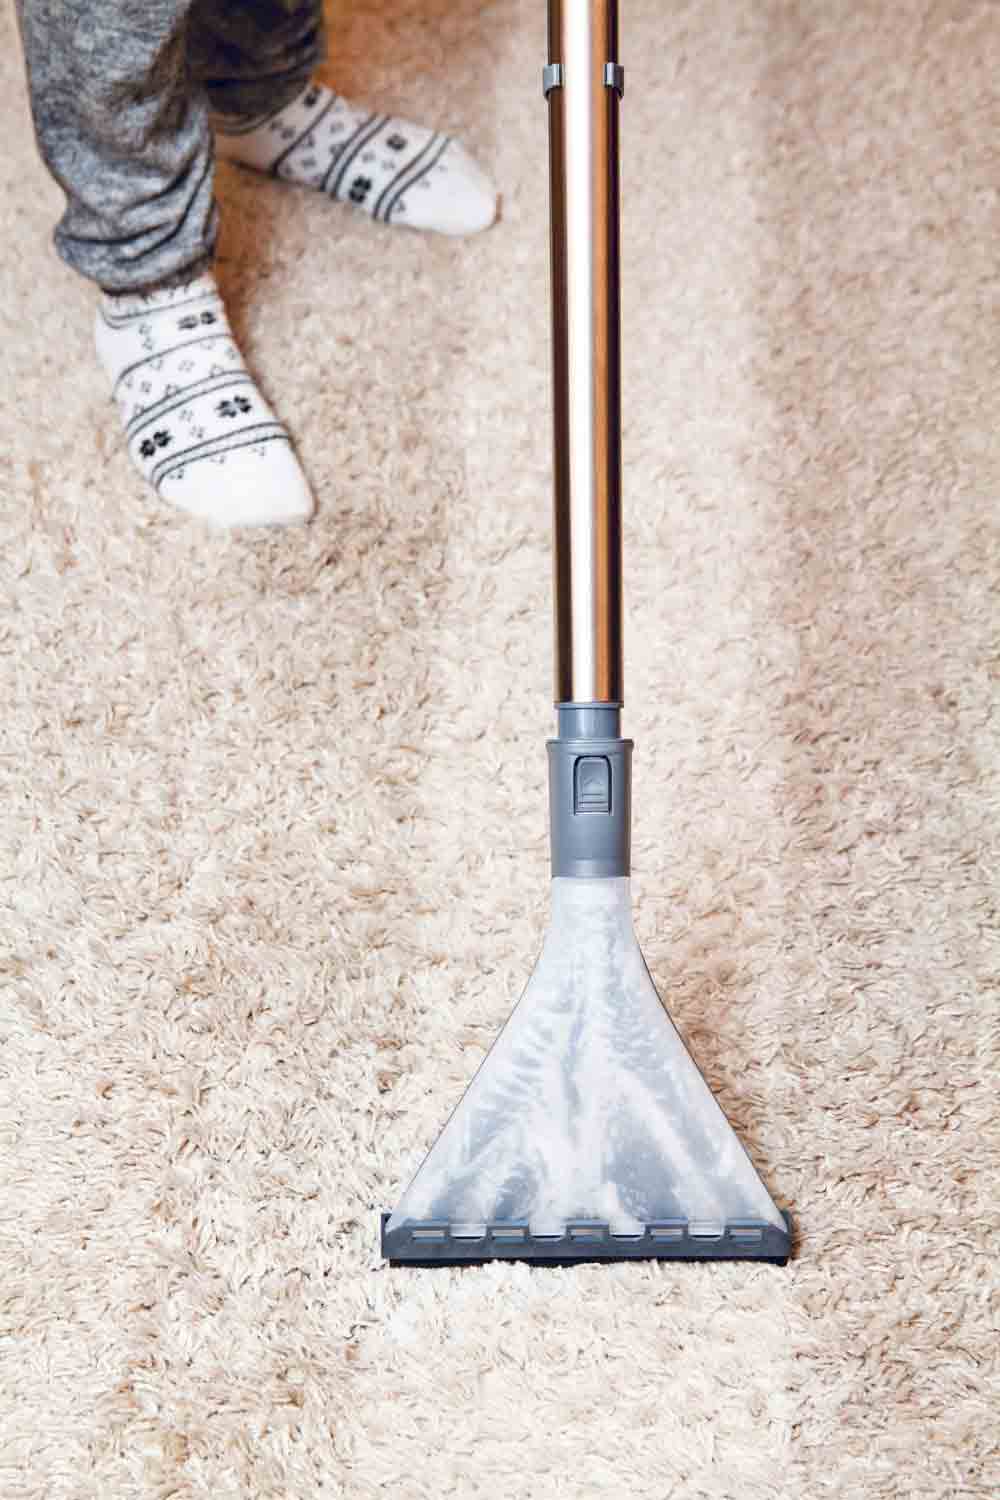 Steam Cleaning a Carpet — Carpet Cleaning in Toowoomba, QLD